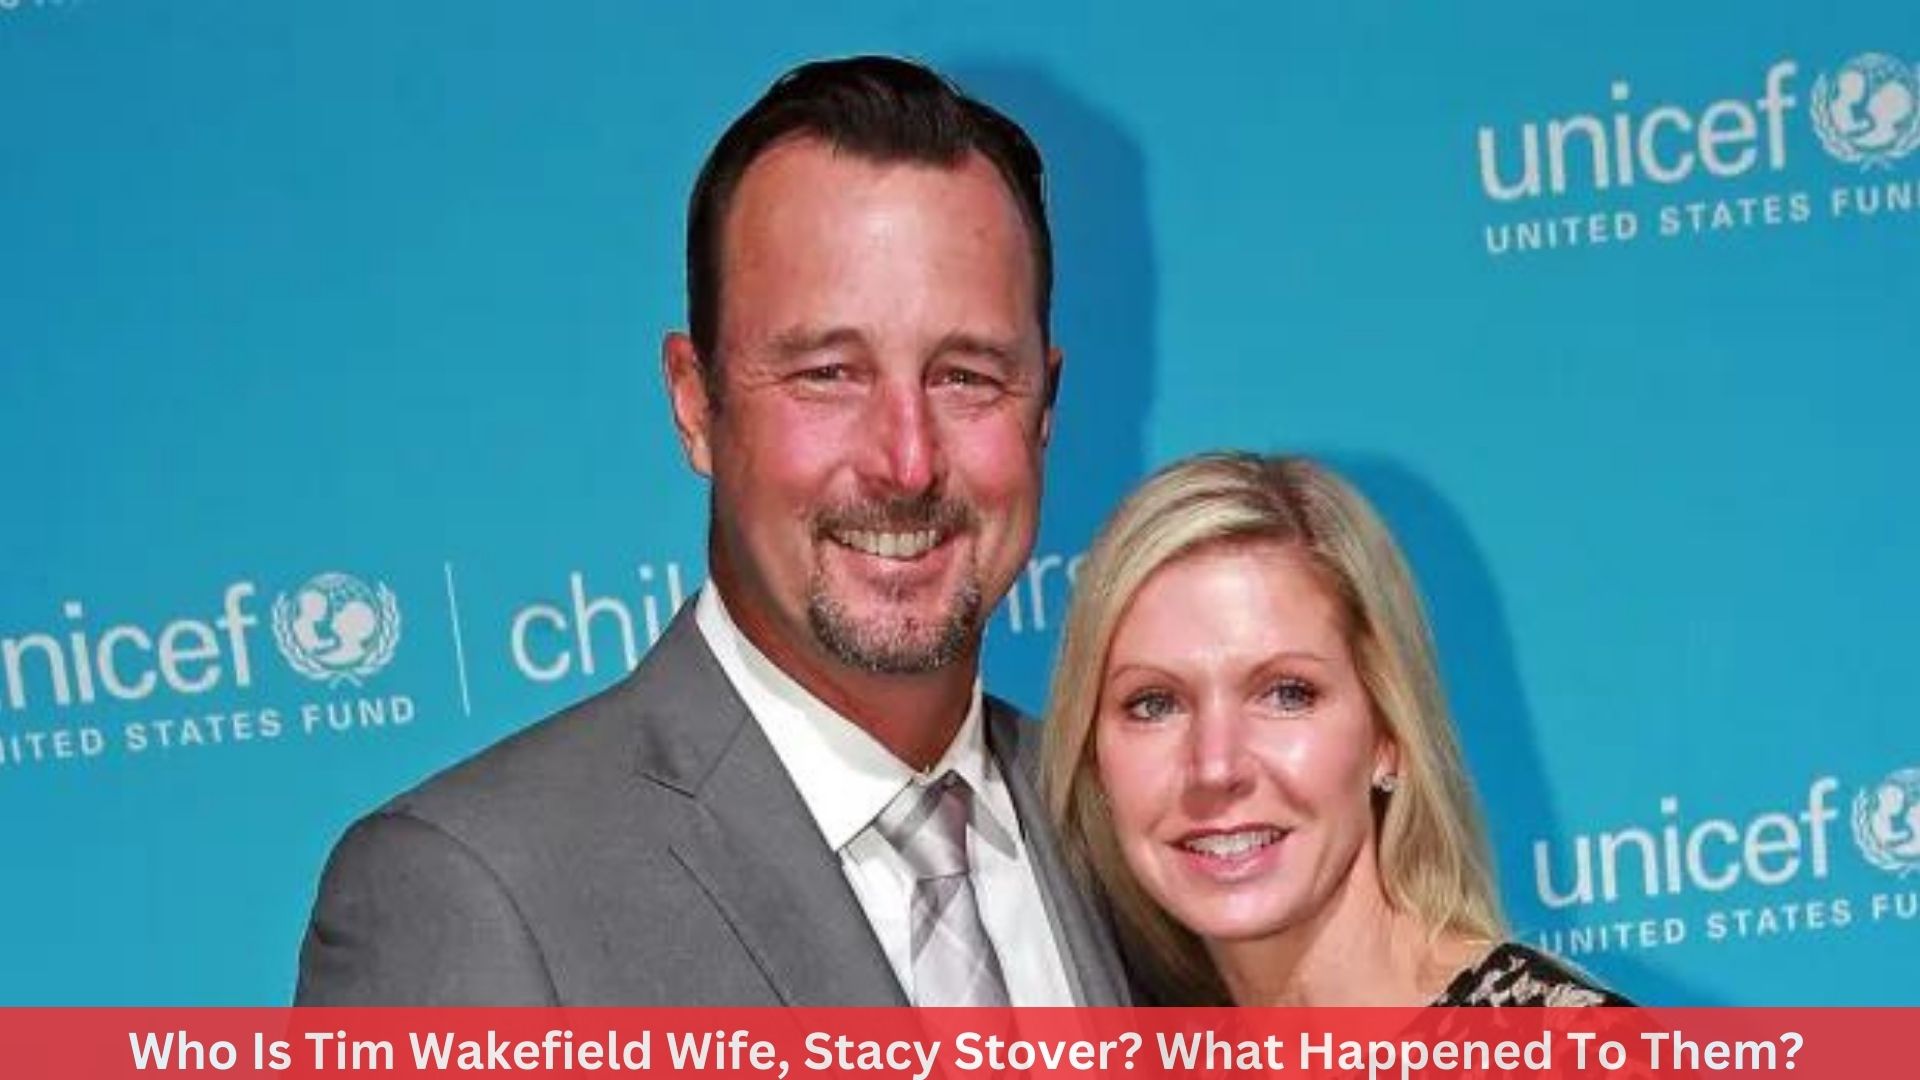 Who Is Tim Wakefield Wife, Stacy Stover? What Happened To Them?